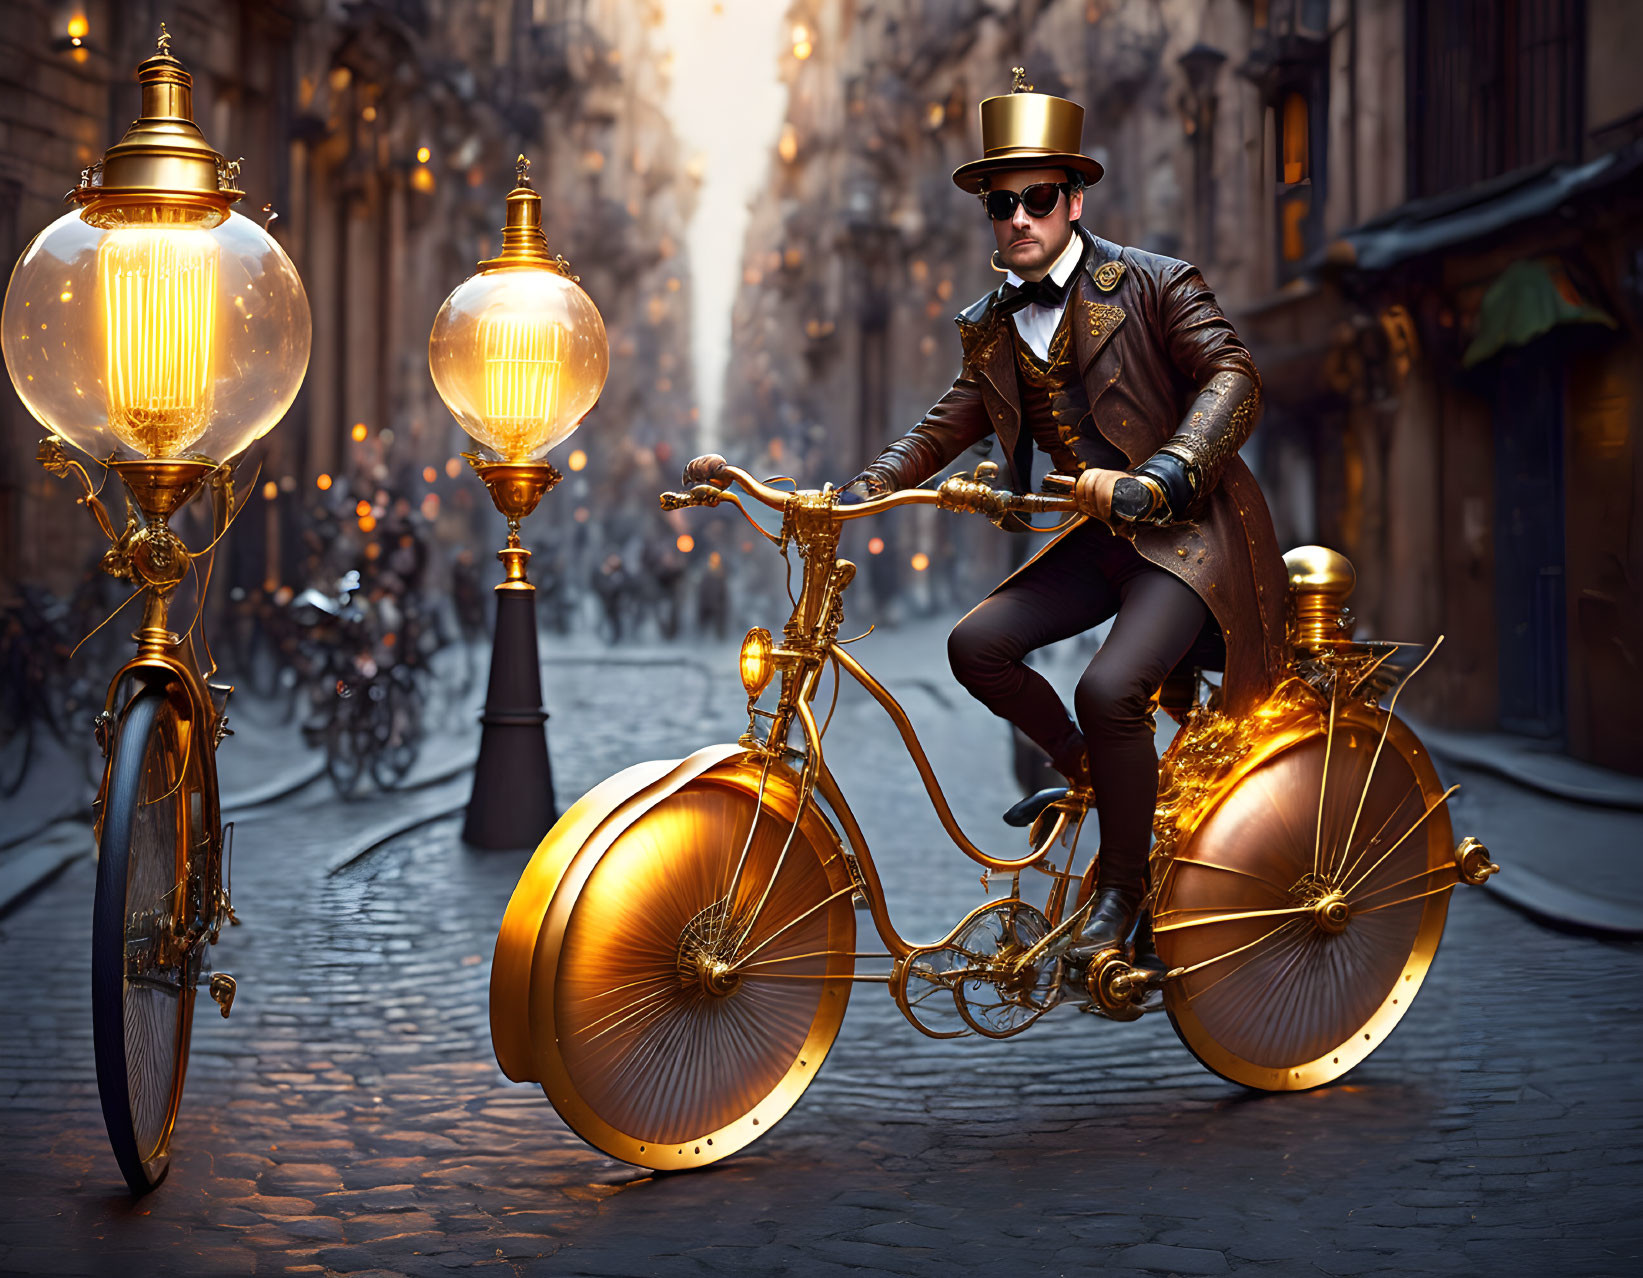 Steampunk man on gold bicycle in vintage street with glowing lamps